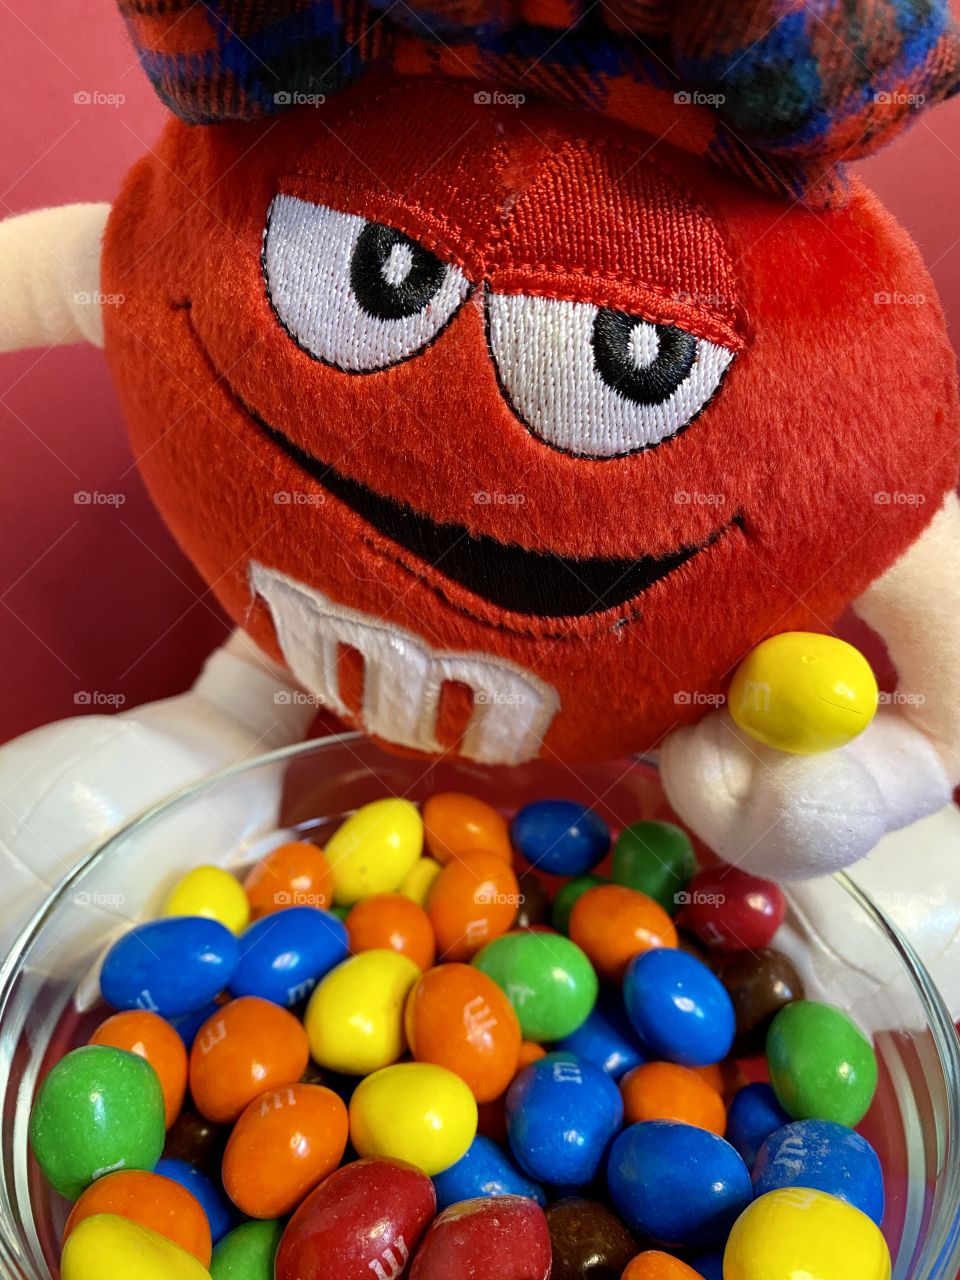 A red m&m plush toy holding a yellow m&m. There is a glass bowl with m&m 